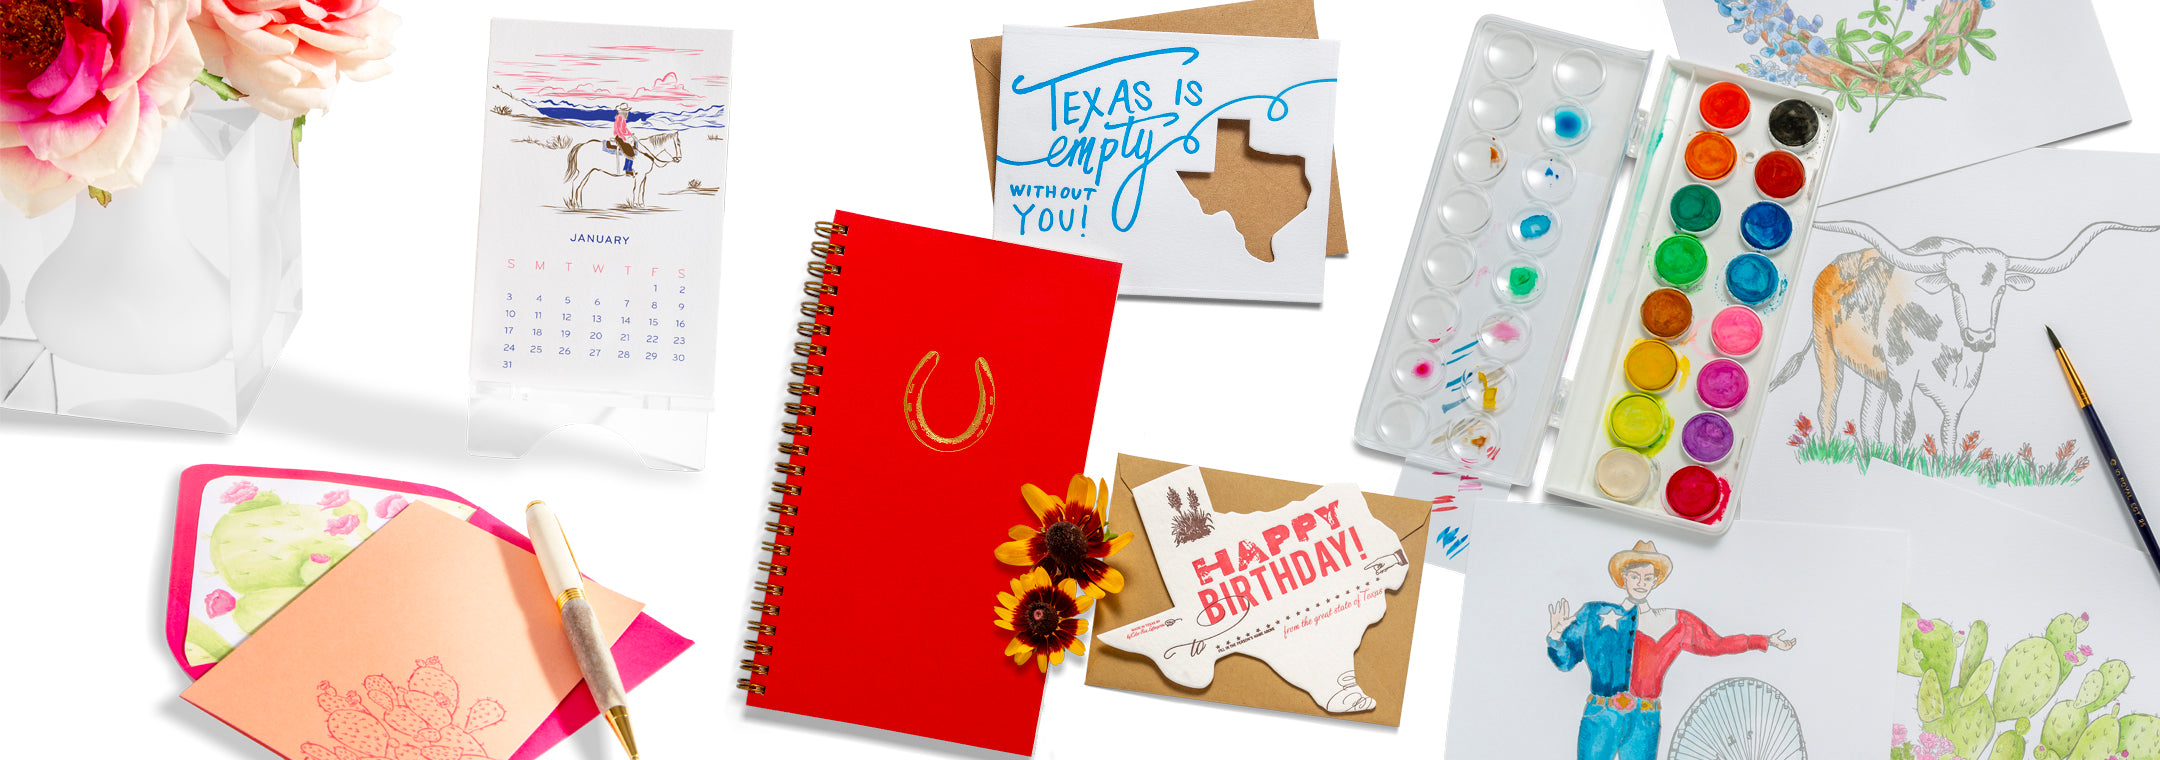 Gift Guides for the Texan